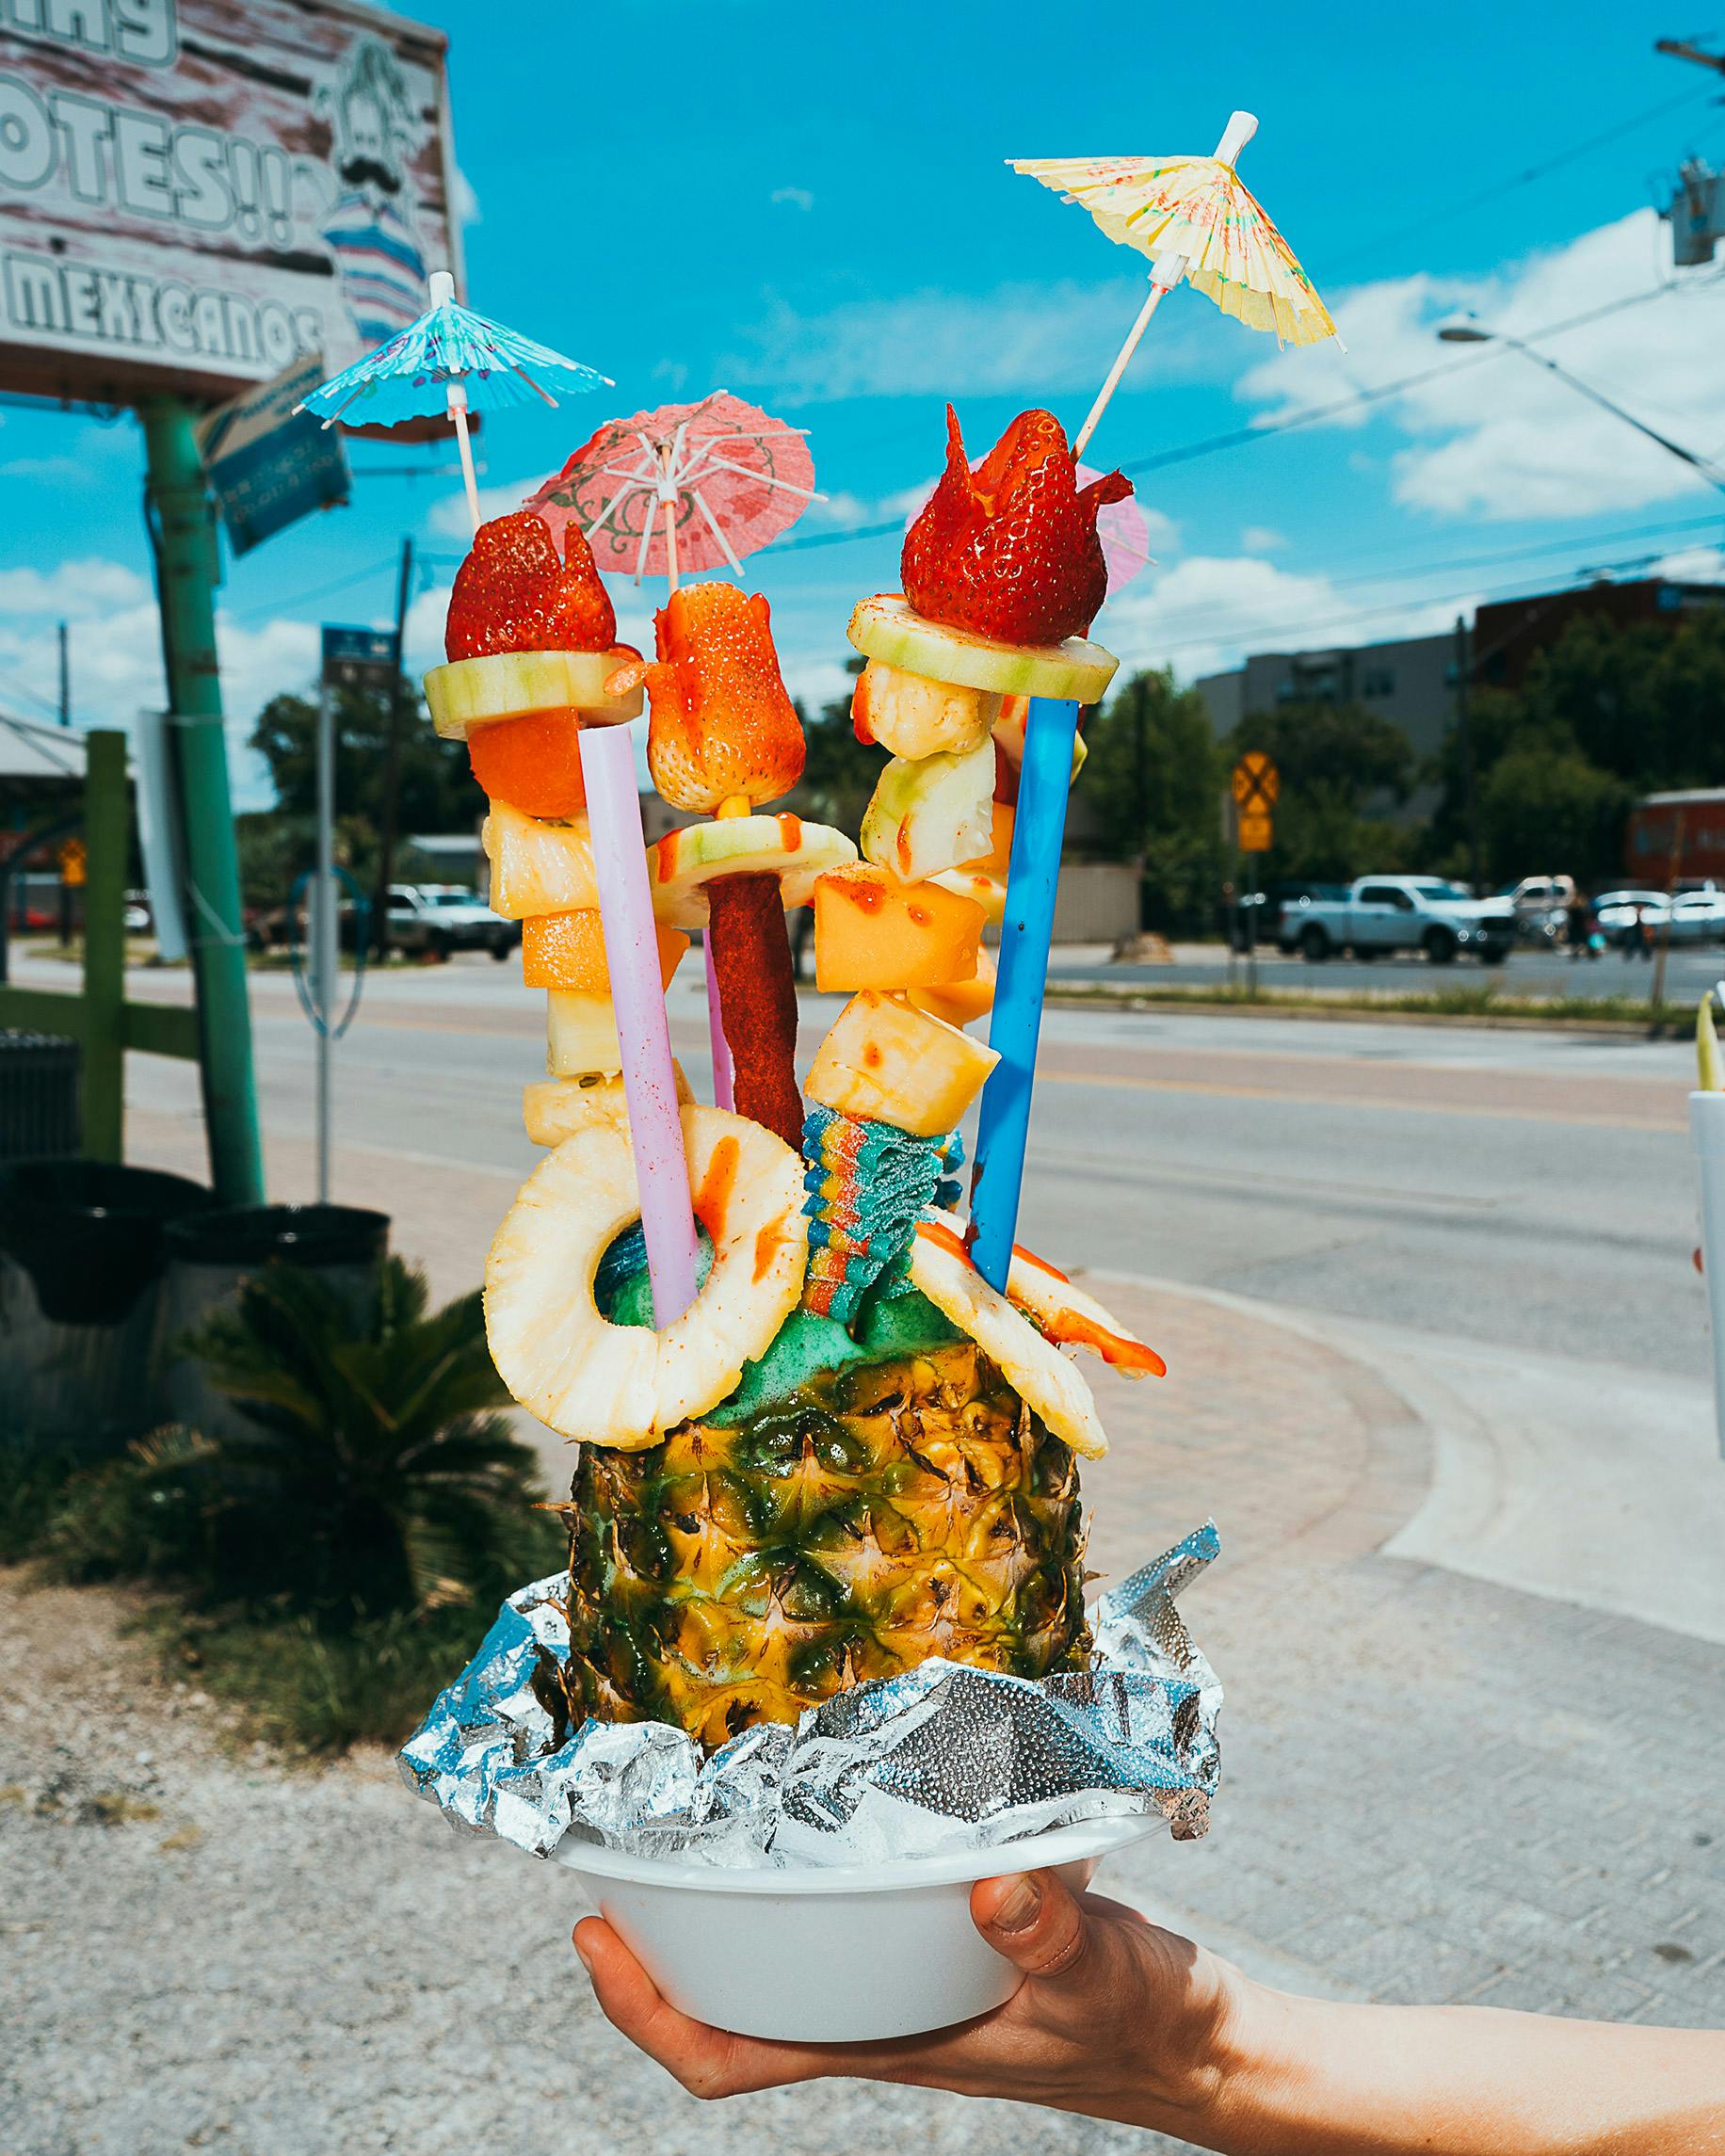 Huge raspa served in a pineapple with two straws, fruit, candy, and umbrella garnishes. 